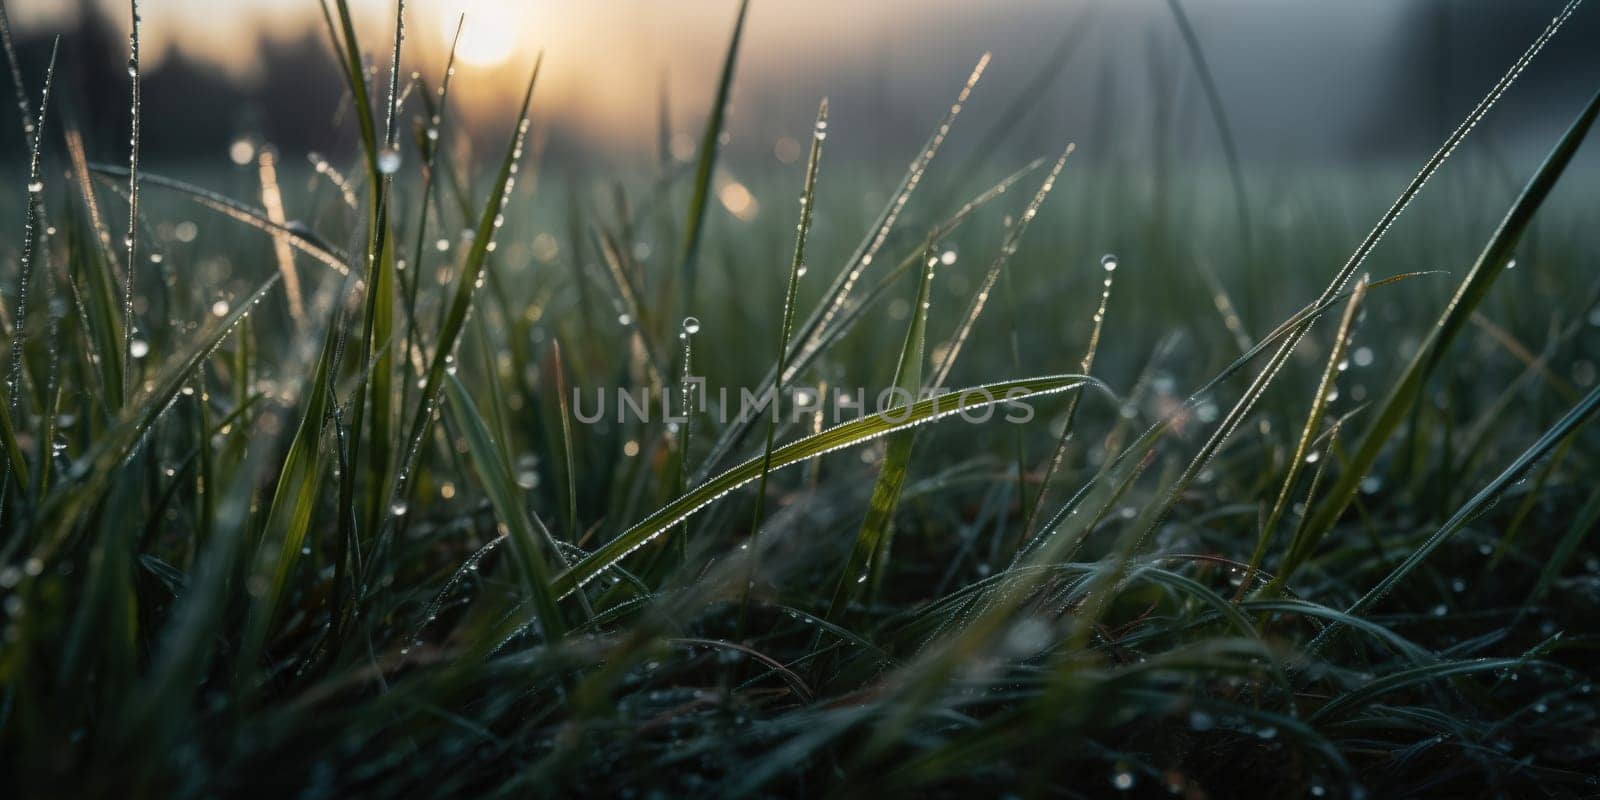 Morning grass with drops of dew by tan4ikk1